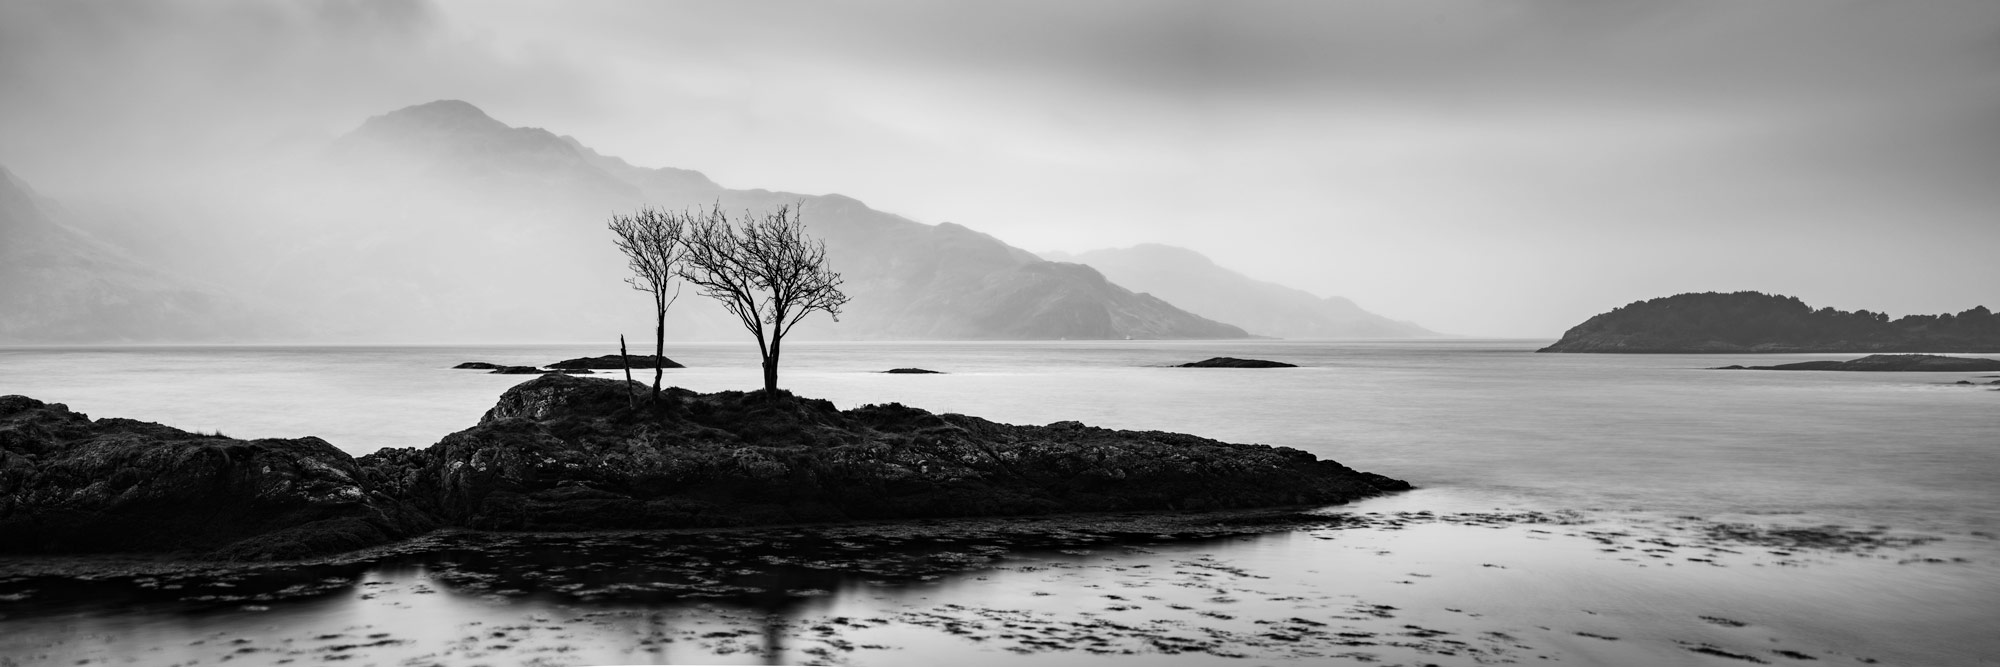 monochrome panorama of Loch Hourn in the Scottish highlands